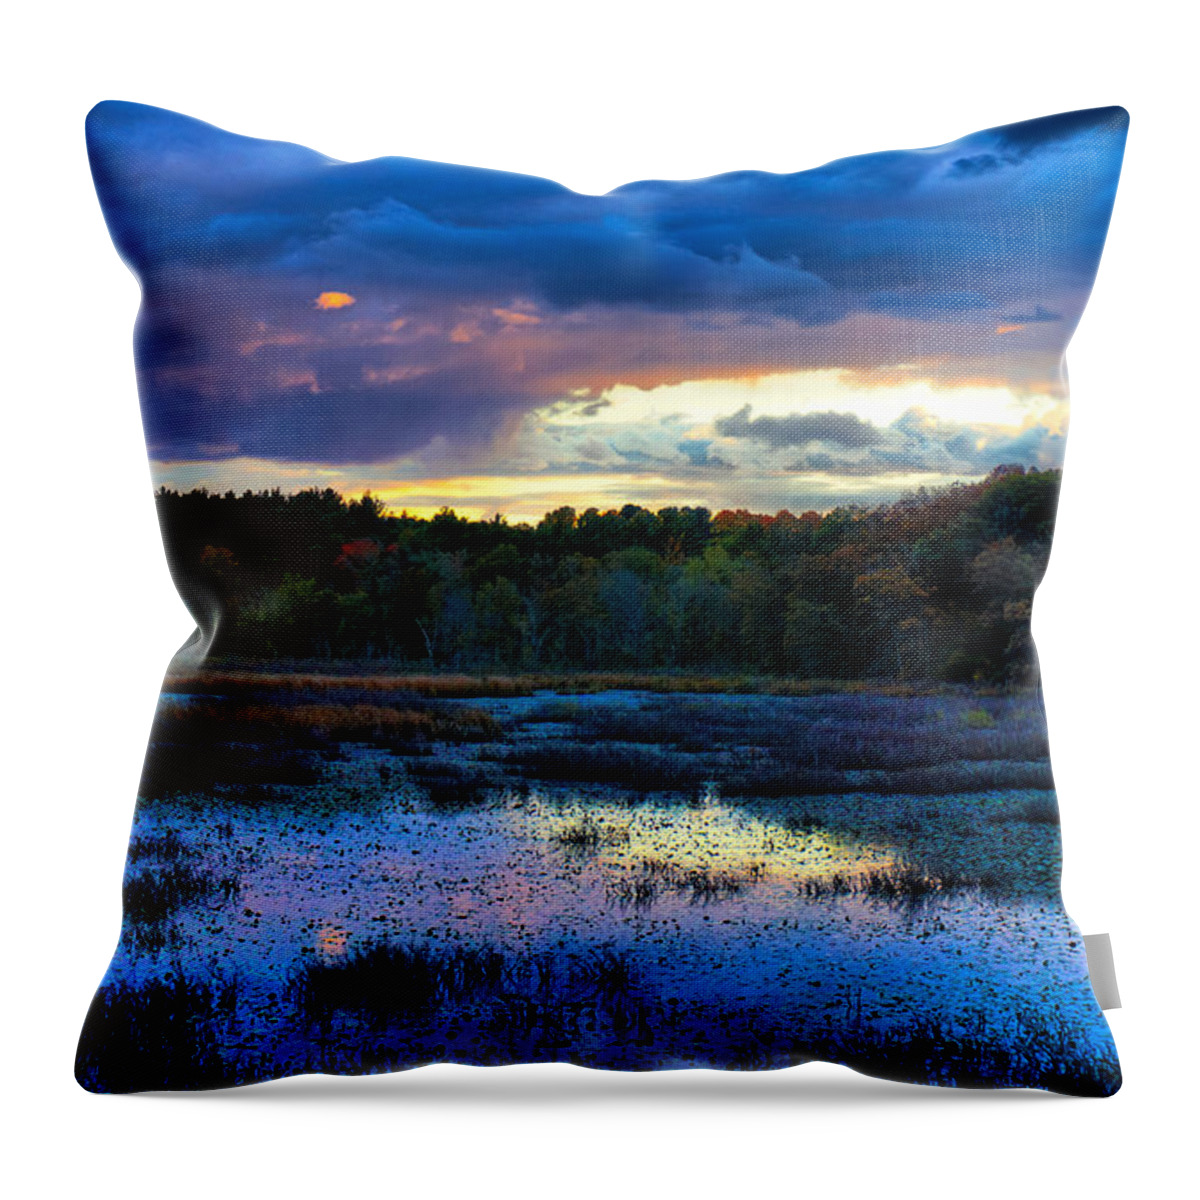 Sunset Throw Pillow featuring the photograph Colorful Autumn Sunset by Lilia D